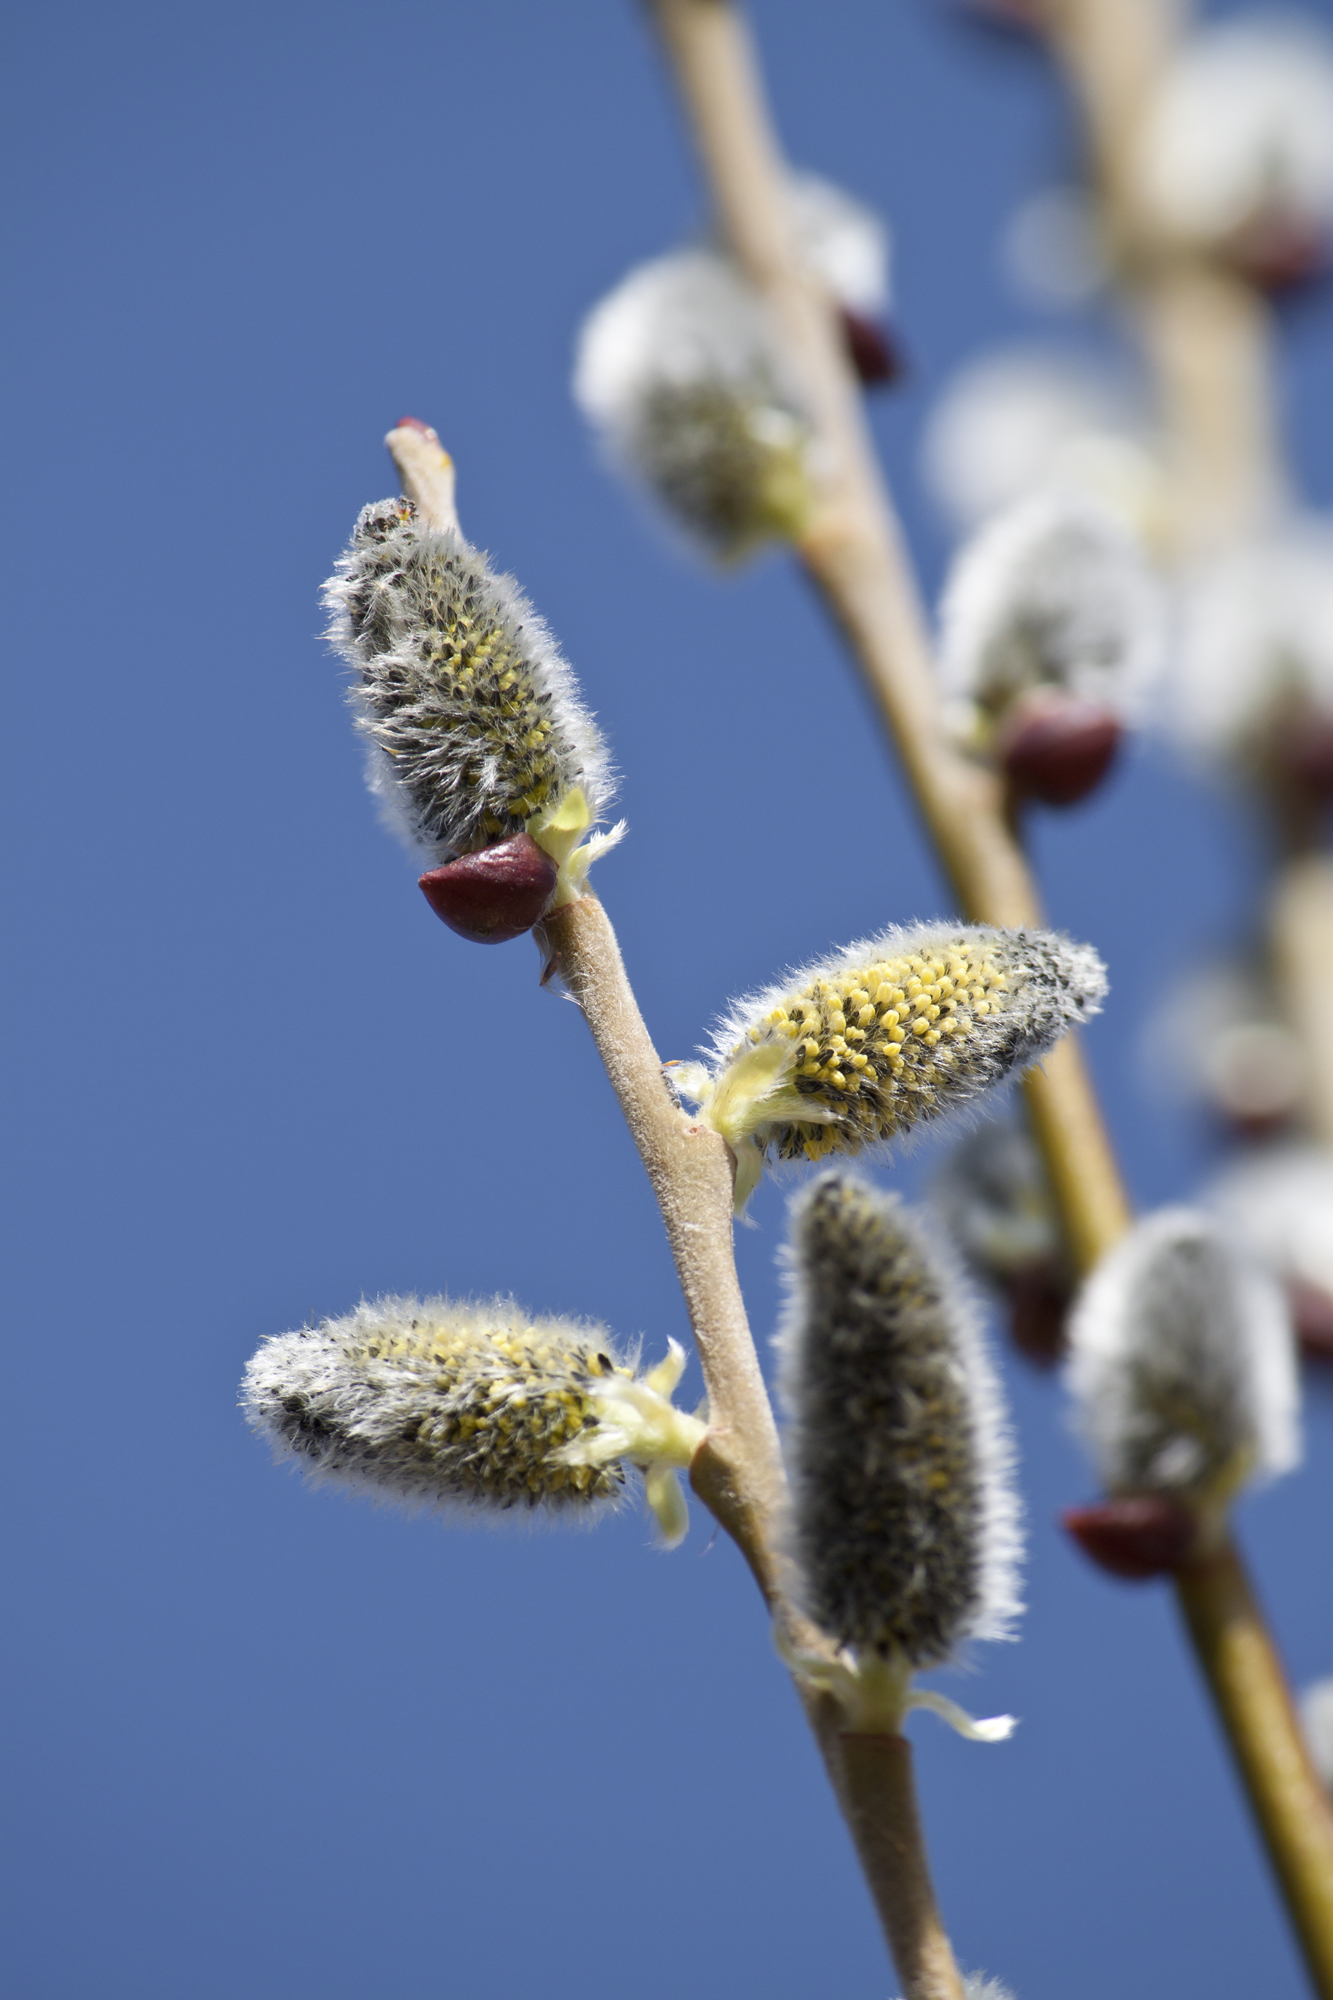 Furry and soft catkins growing on a willow about to open out into clusters of tiny flowers.